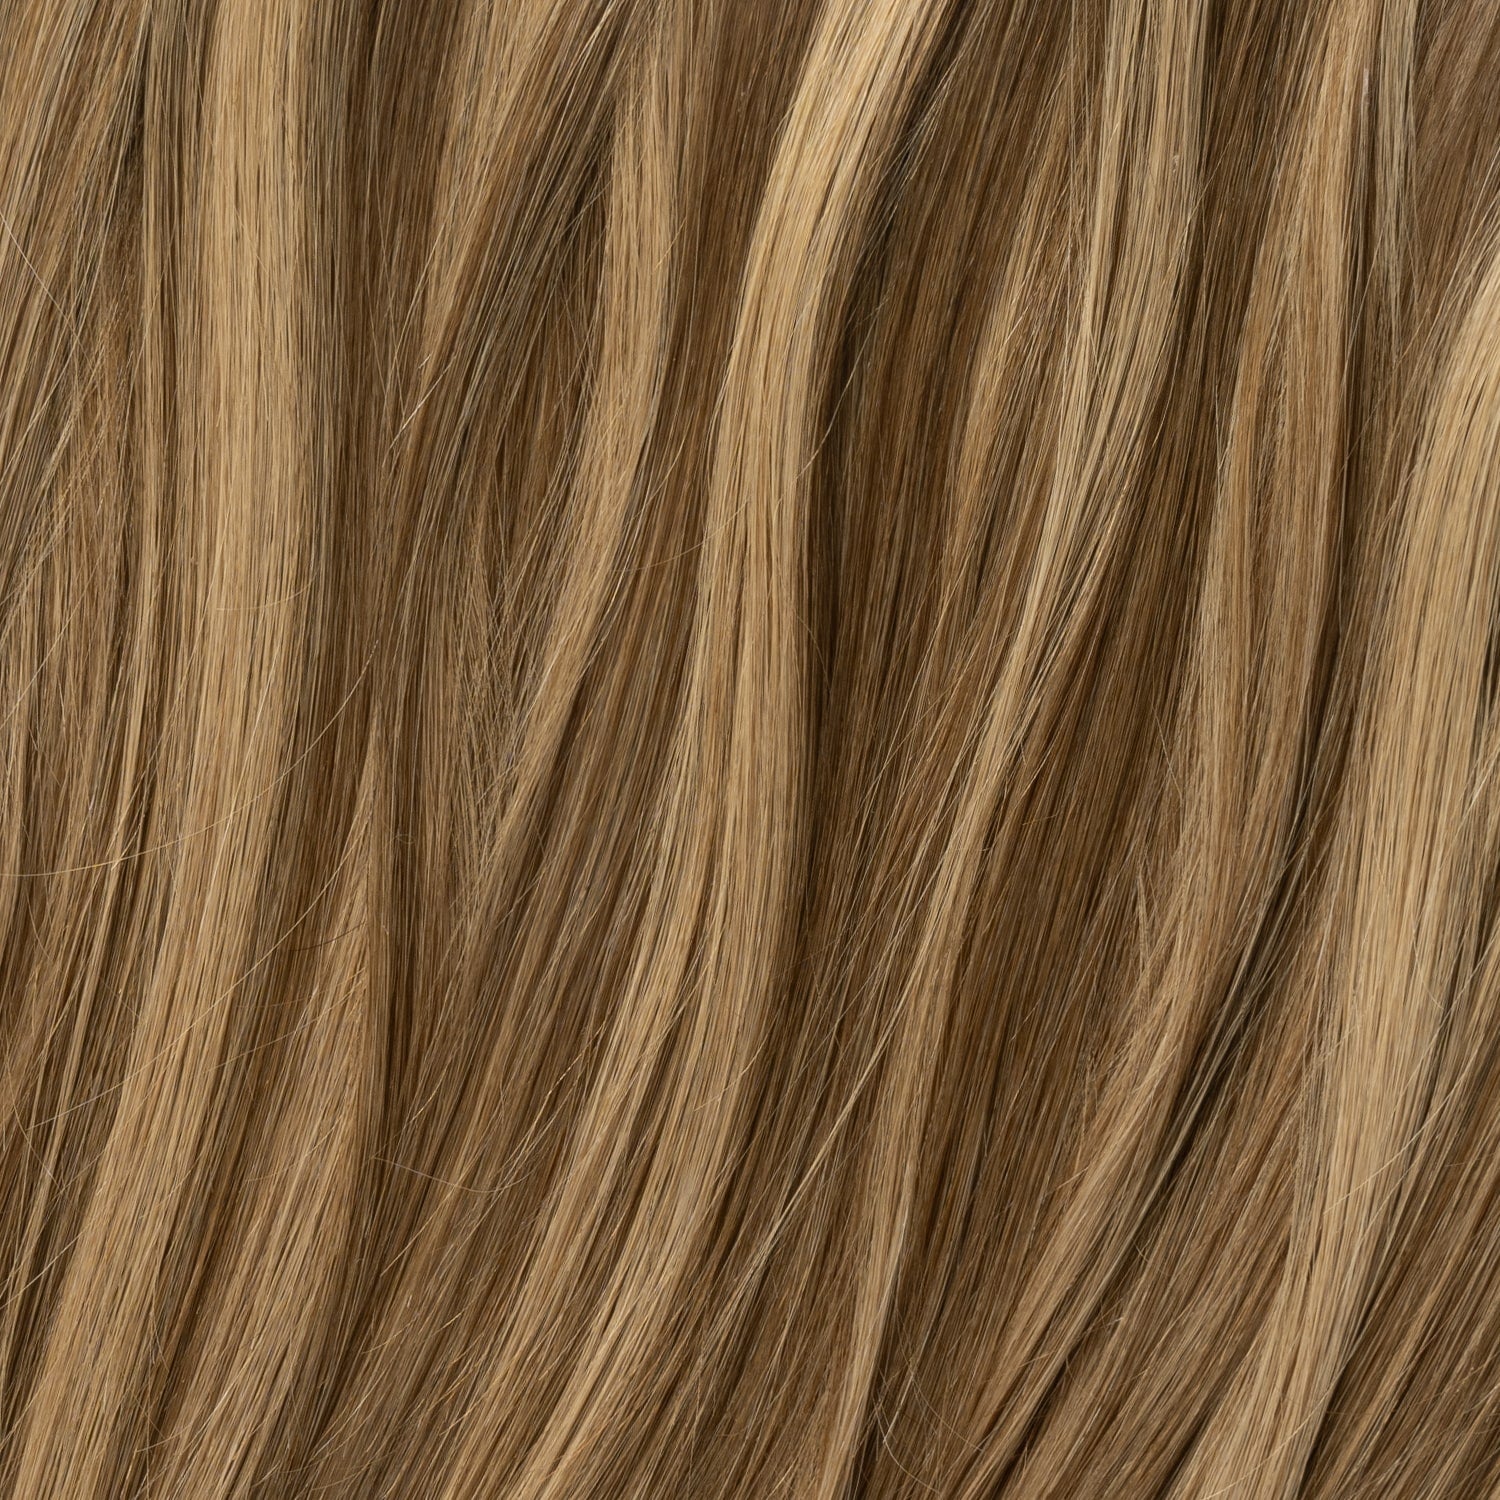 Clip on - Natural Brown Mix 3/10